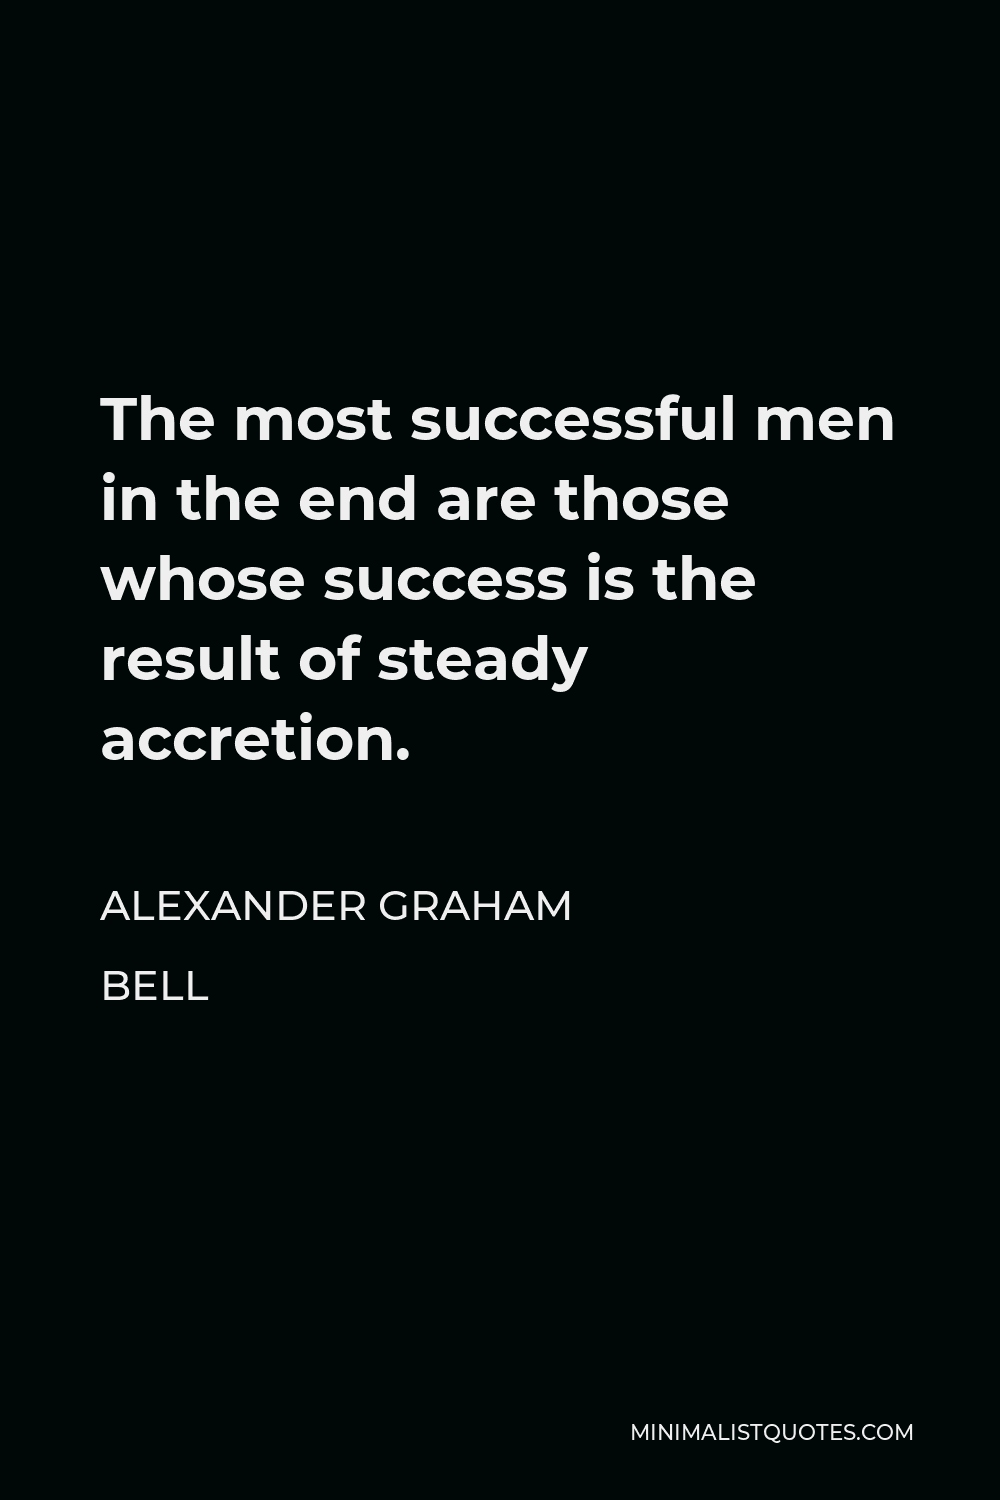 Alexander Graham Bell Quote - The most successful men in the end are those whose success is the result of steady accretion.